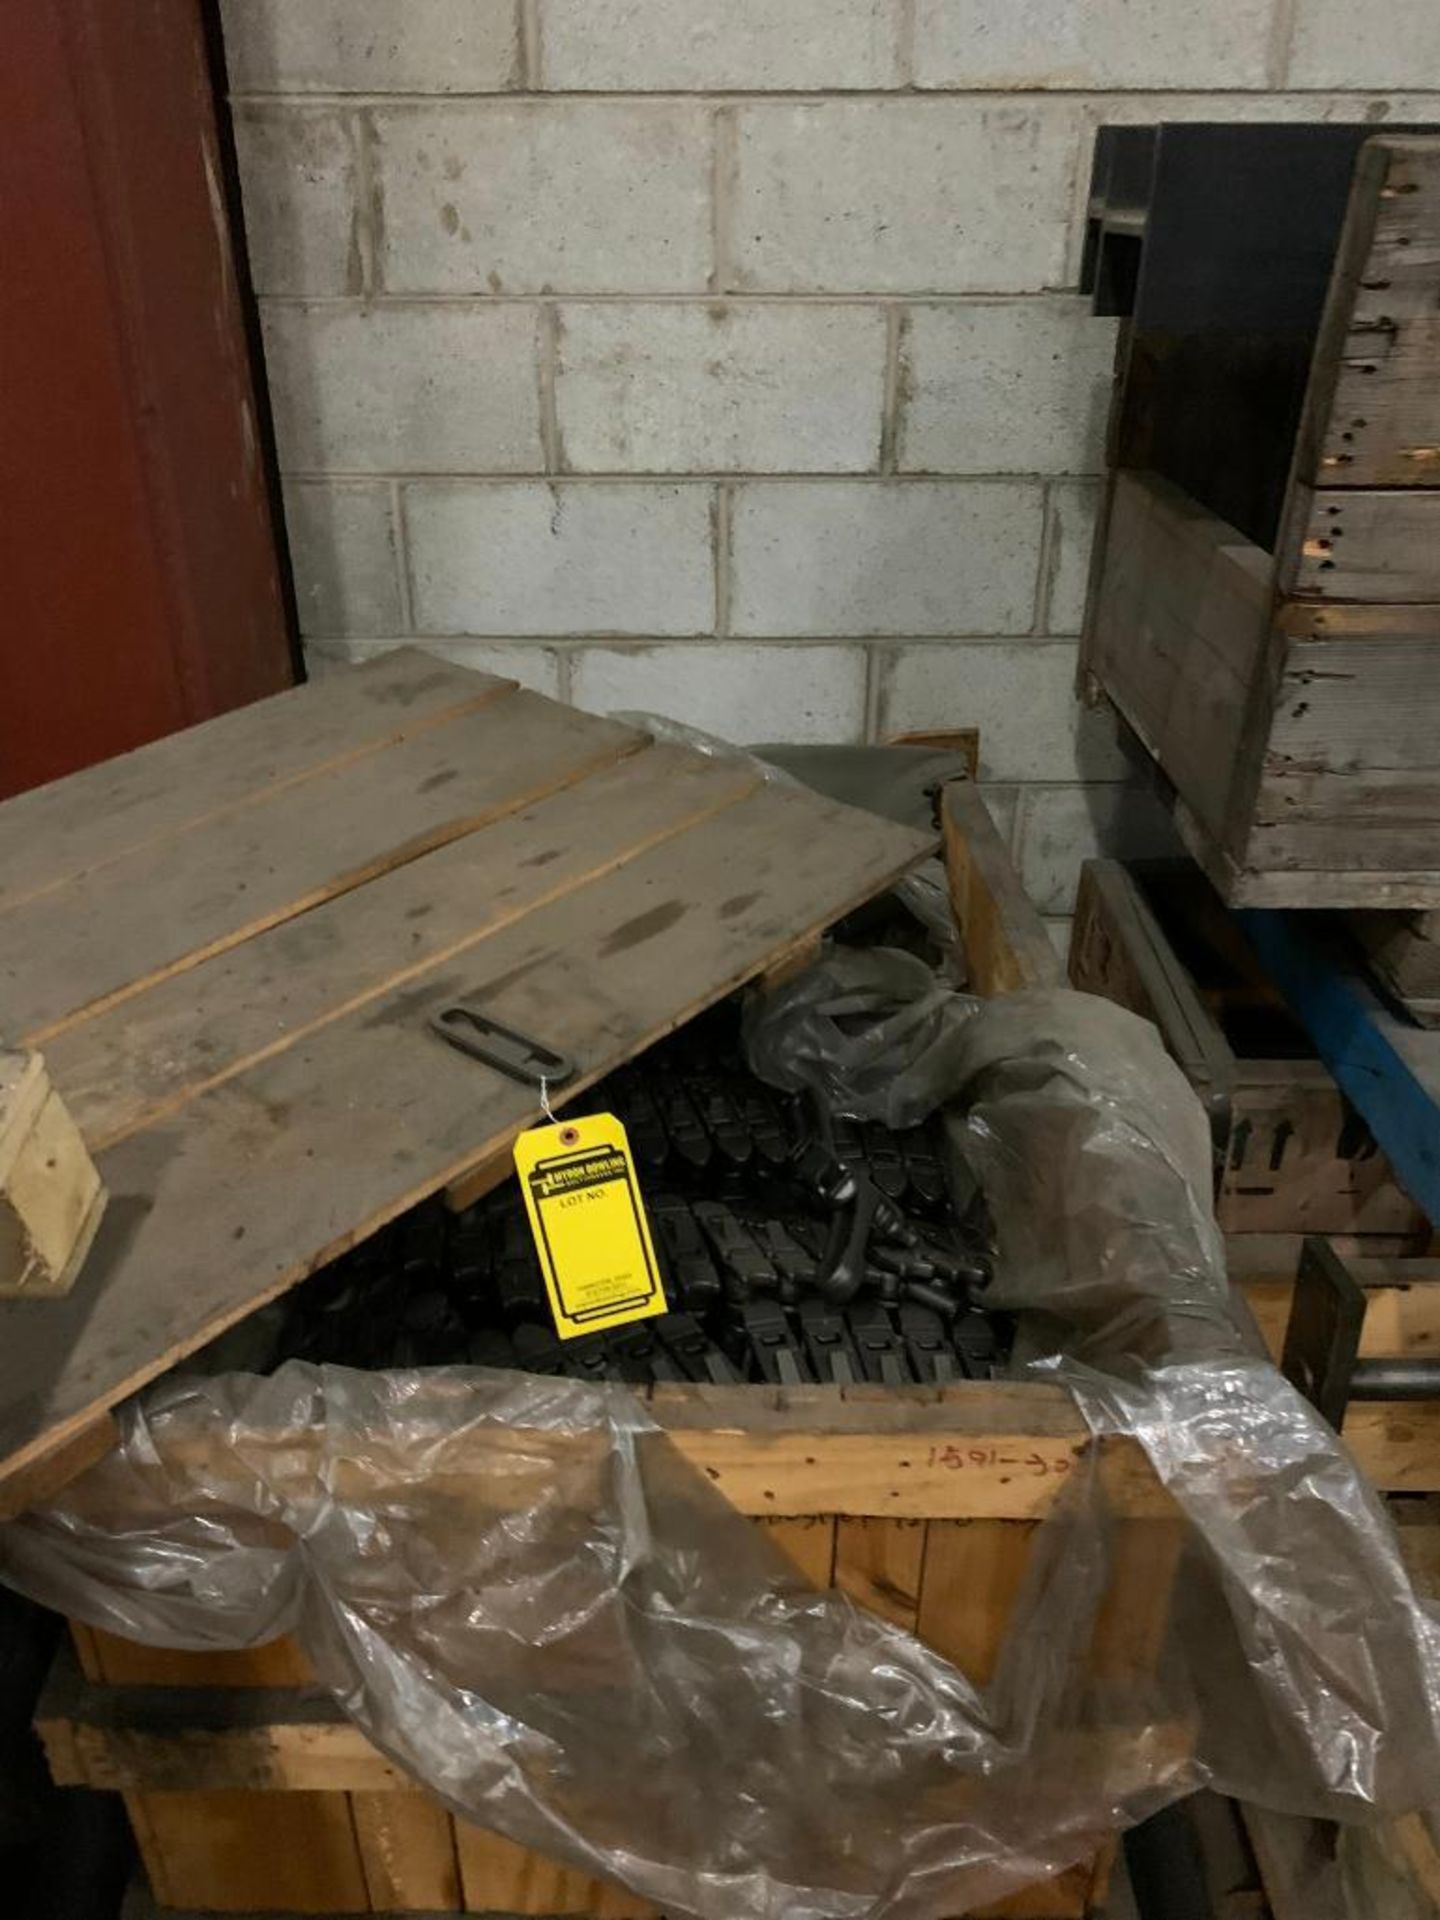 (LOT) (3) Crates of 6' Drive & Idle Cylinders, Hardware, Brackets, Transfer Chain, Cradle Carriages - Image 8 of 10